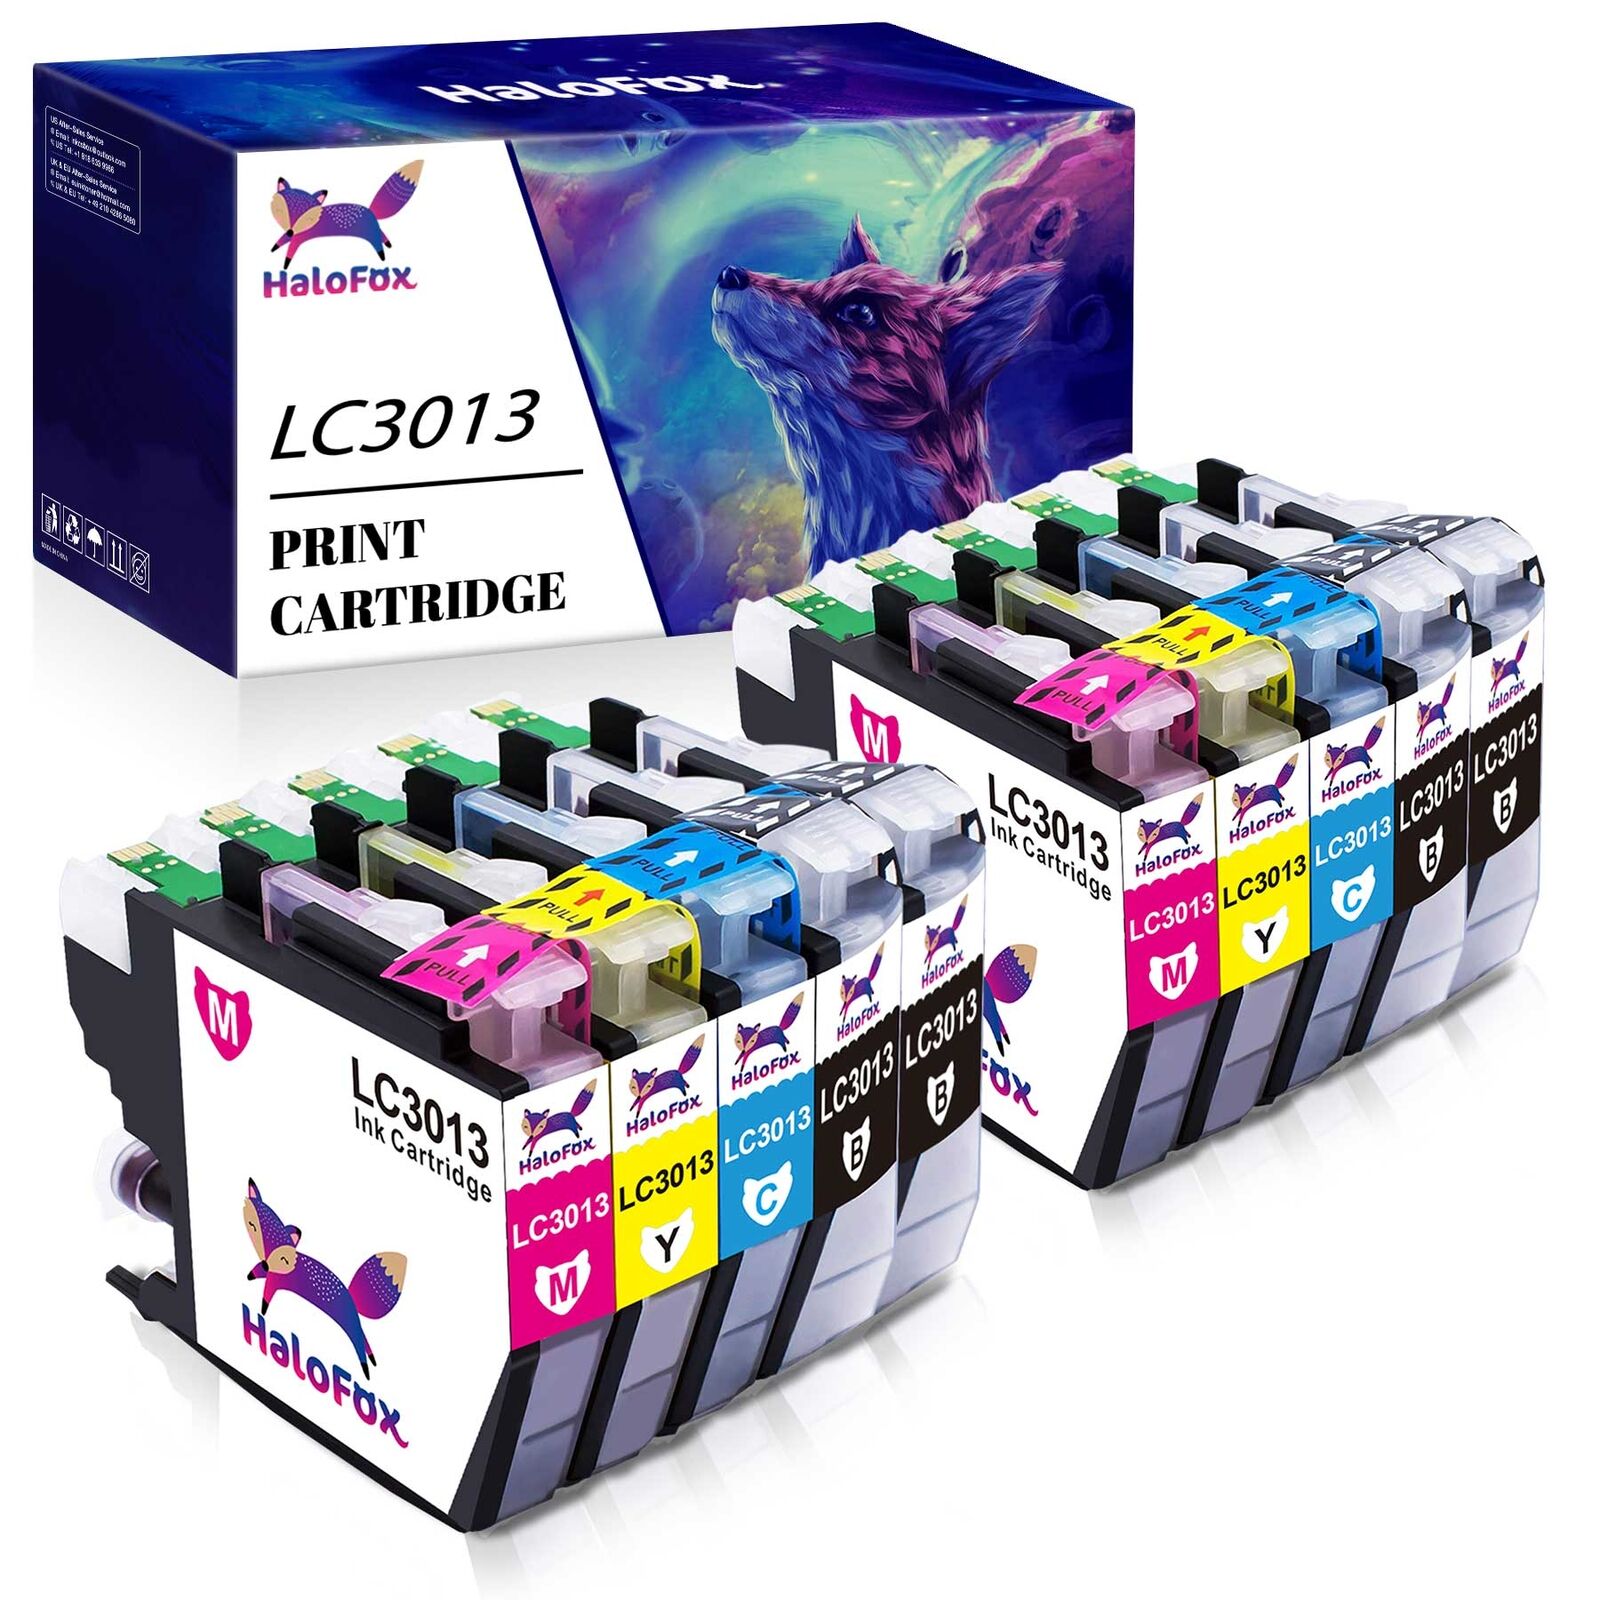 10x Ink Cartridge for Brother LC3013 LC3011 MFC-J690DW J491DW MFC-J491DW Printer